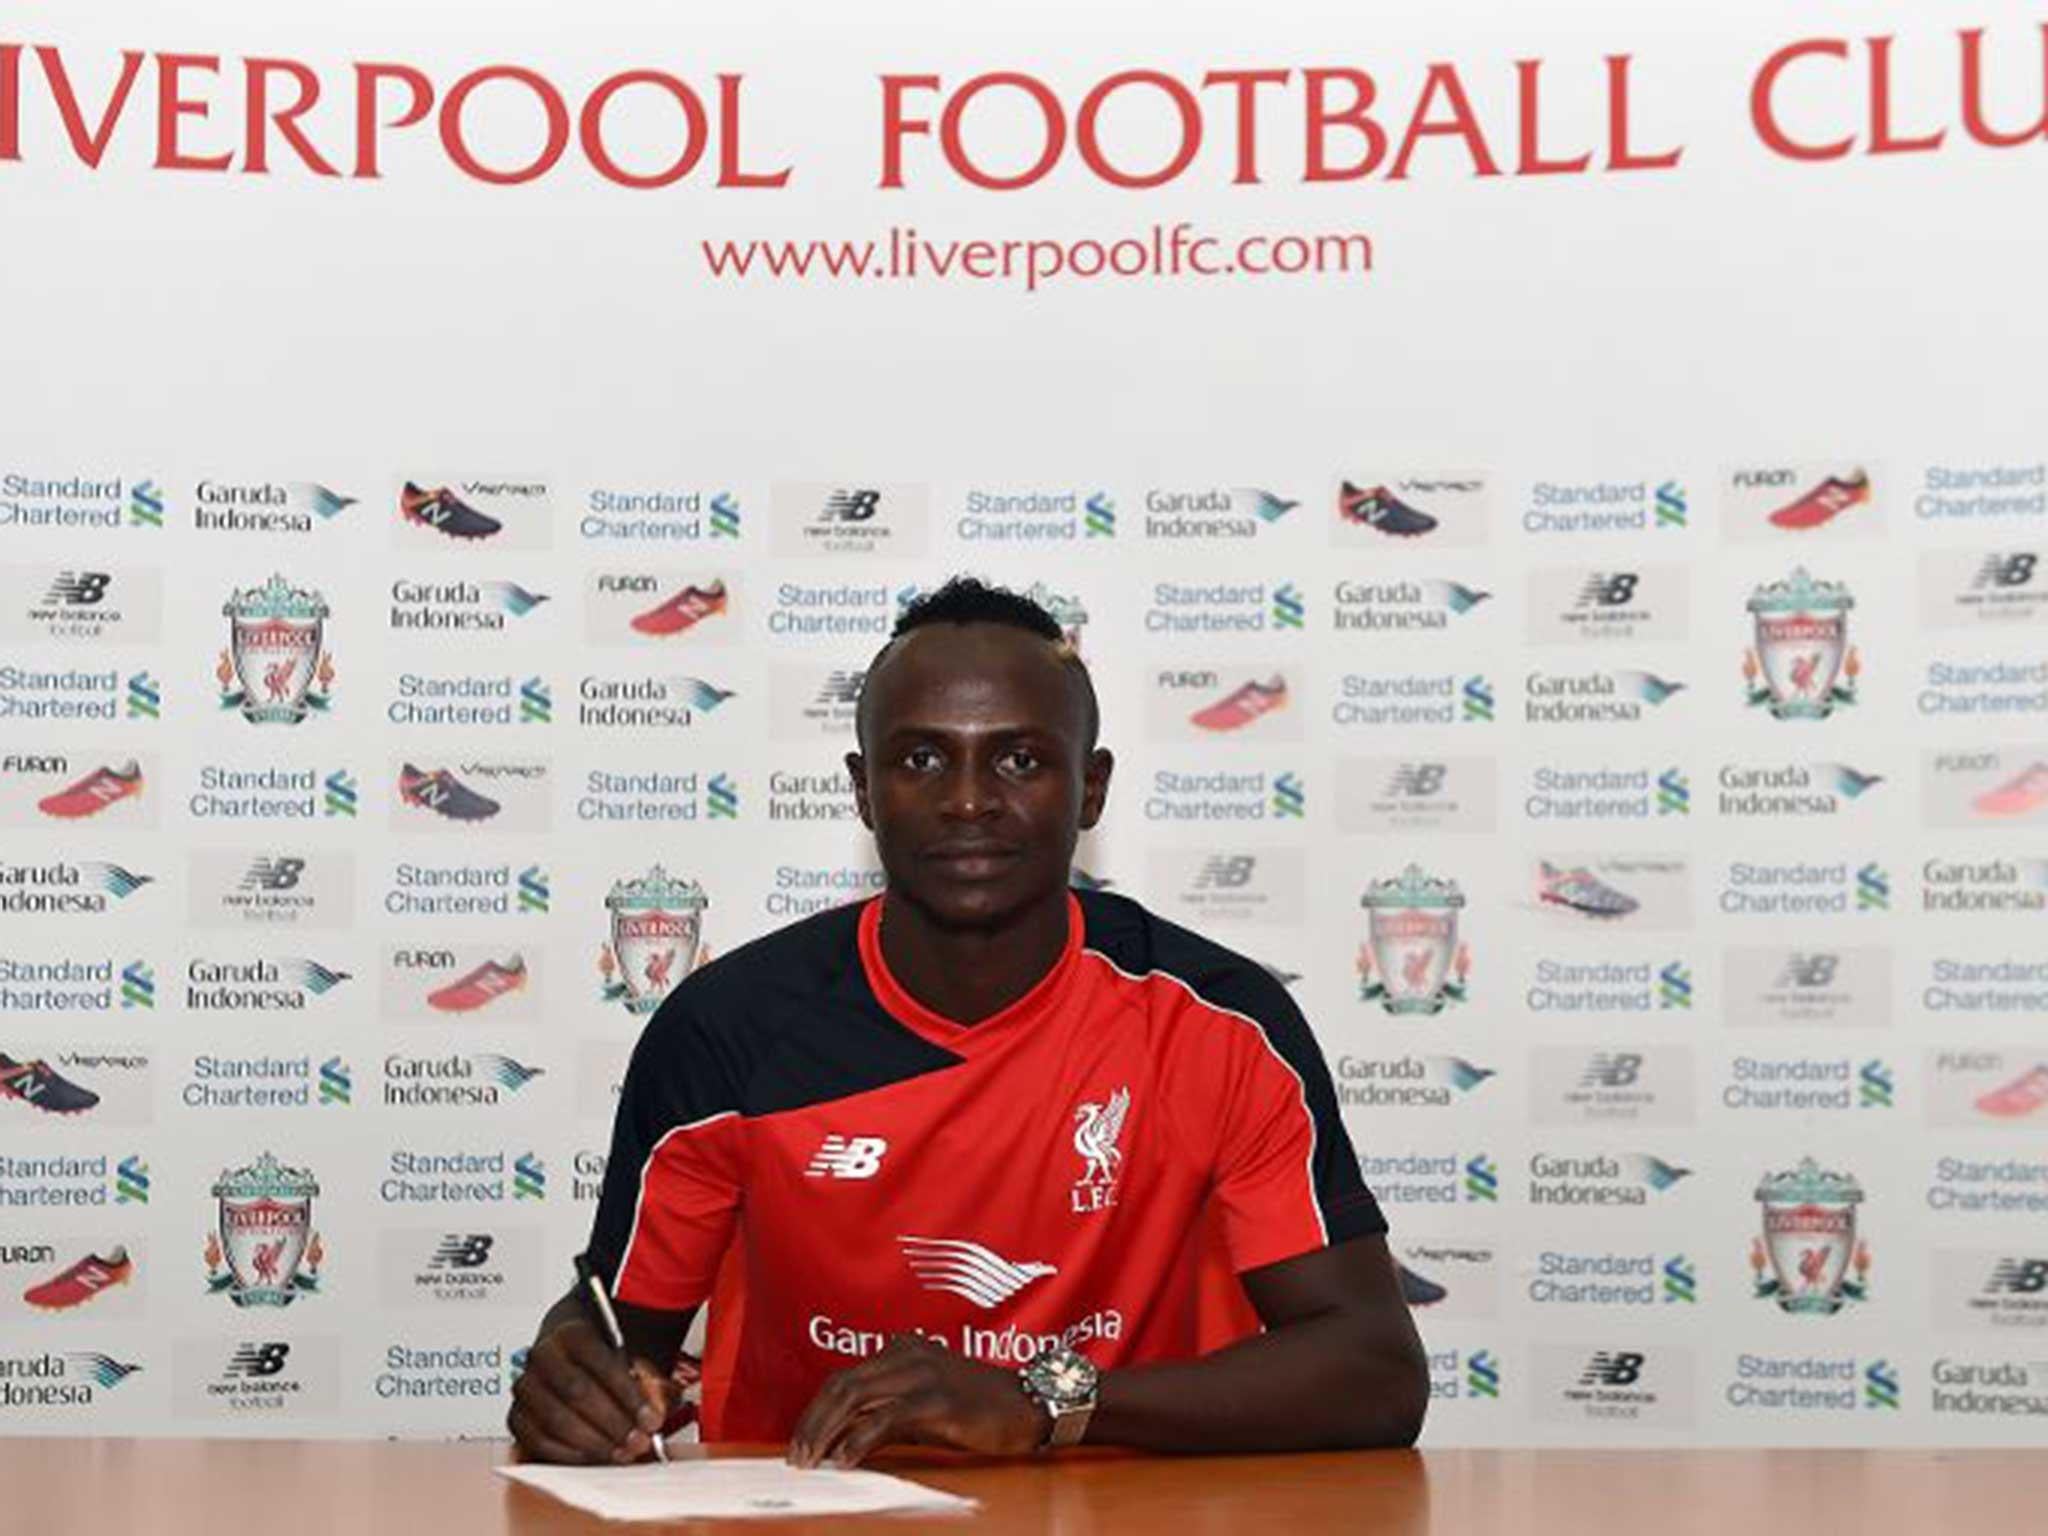 Sadio Mane signs his contract at Liverpool after joining from Southampton